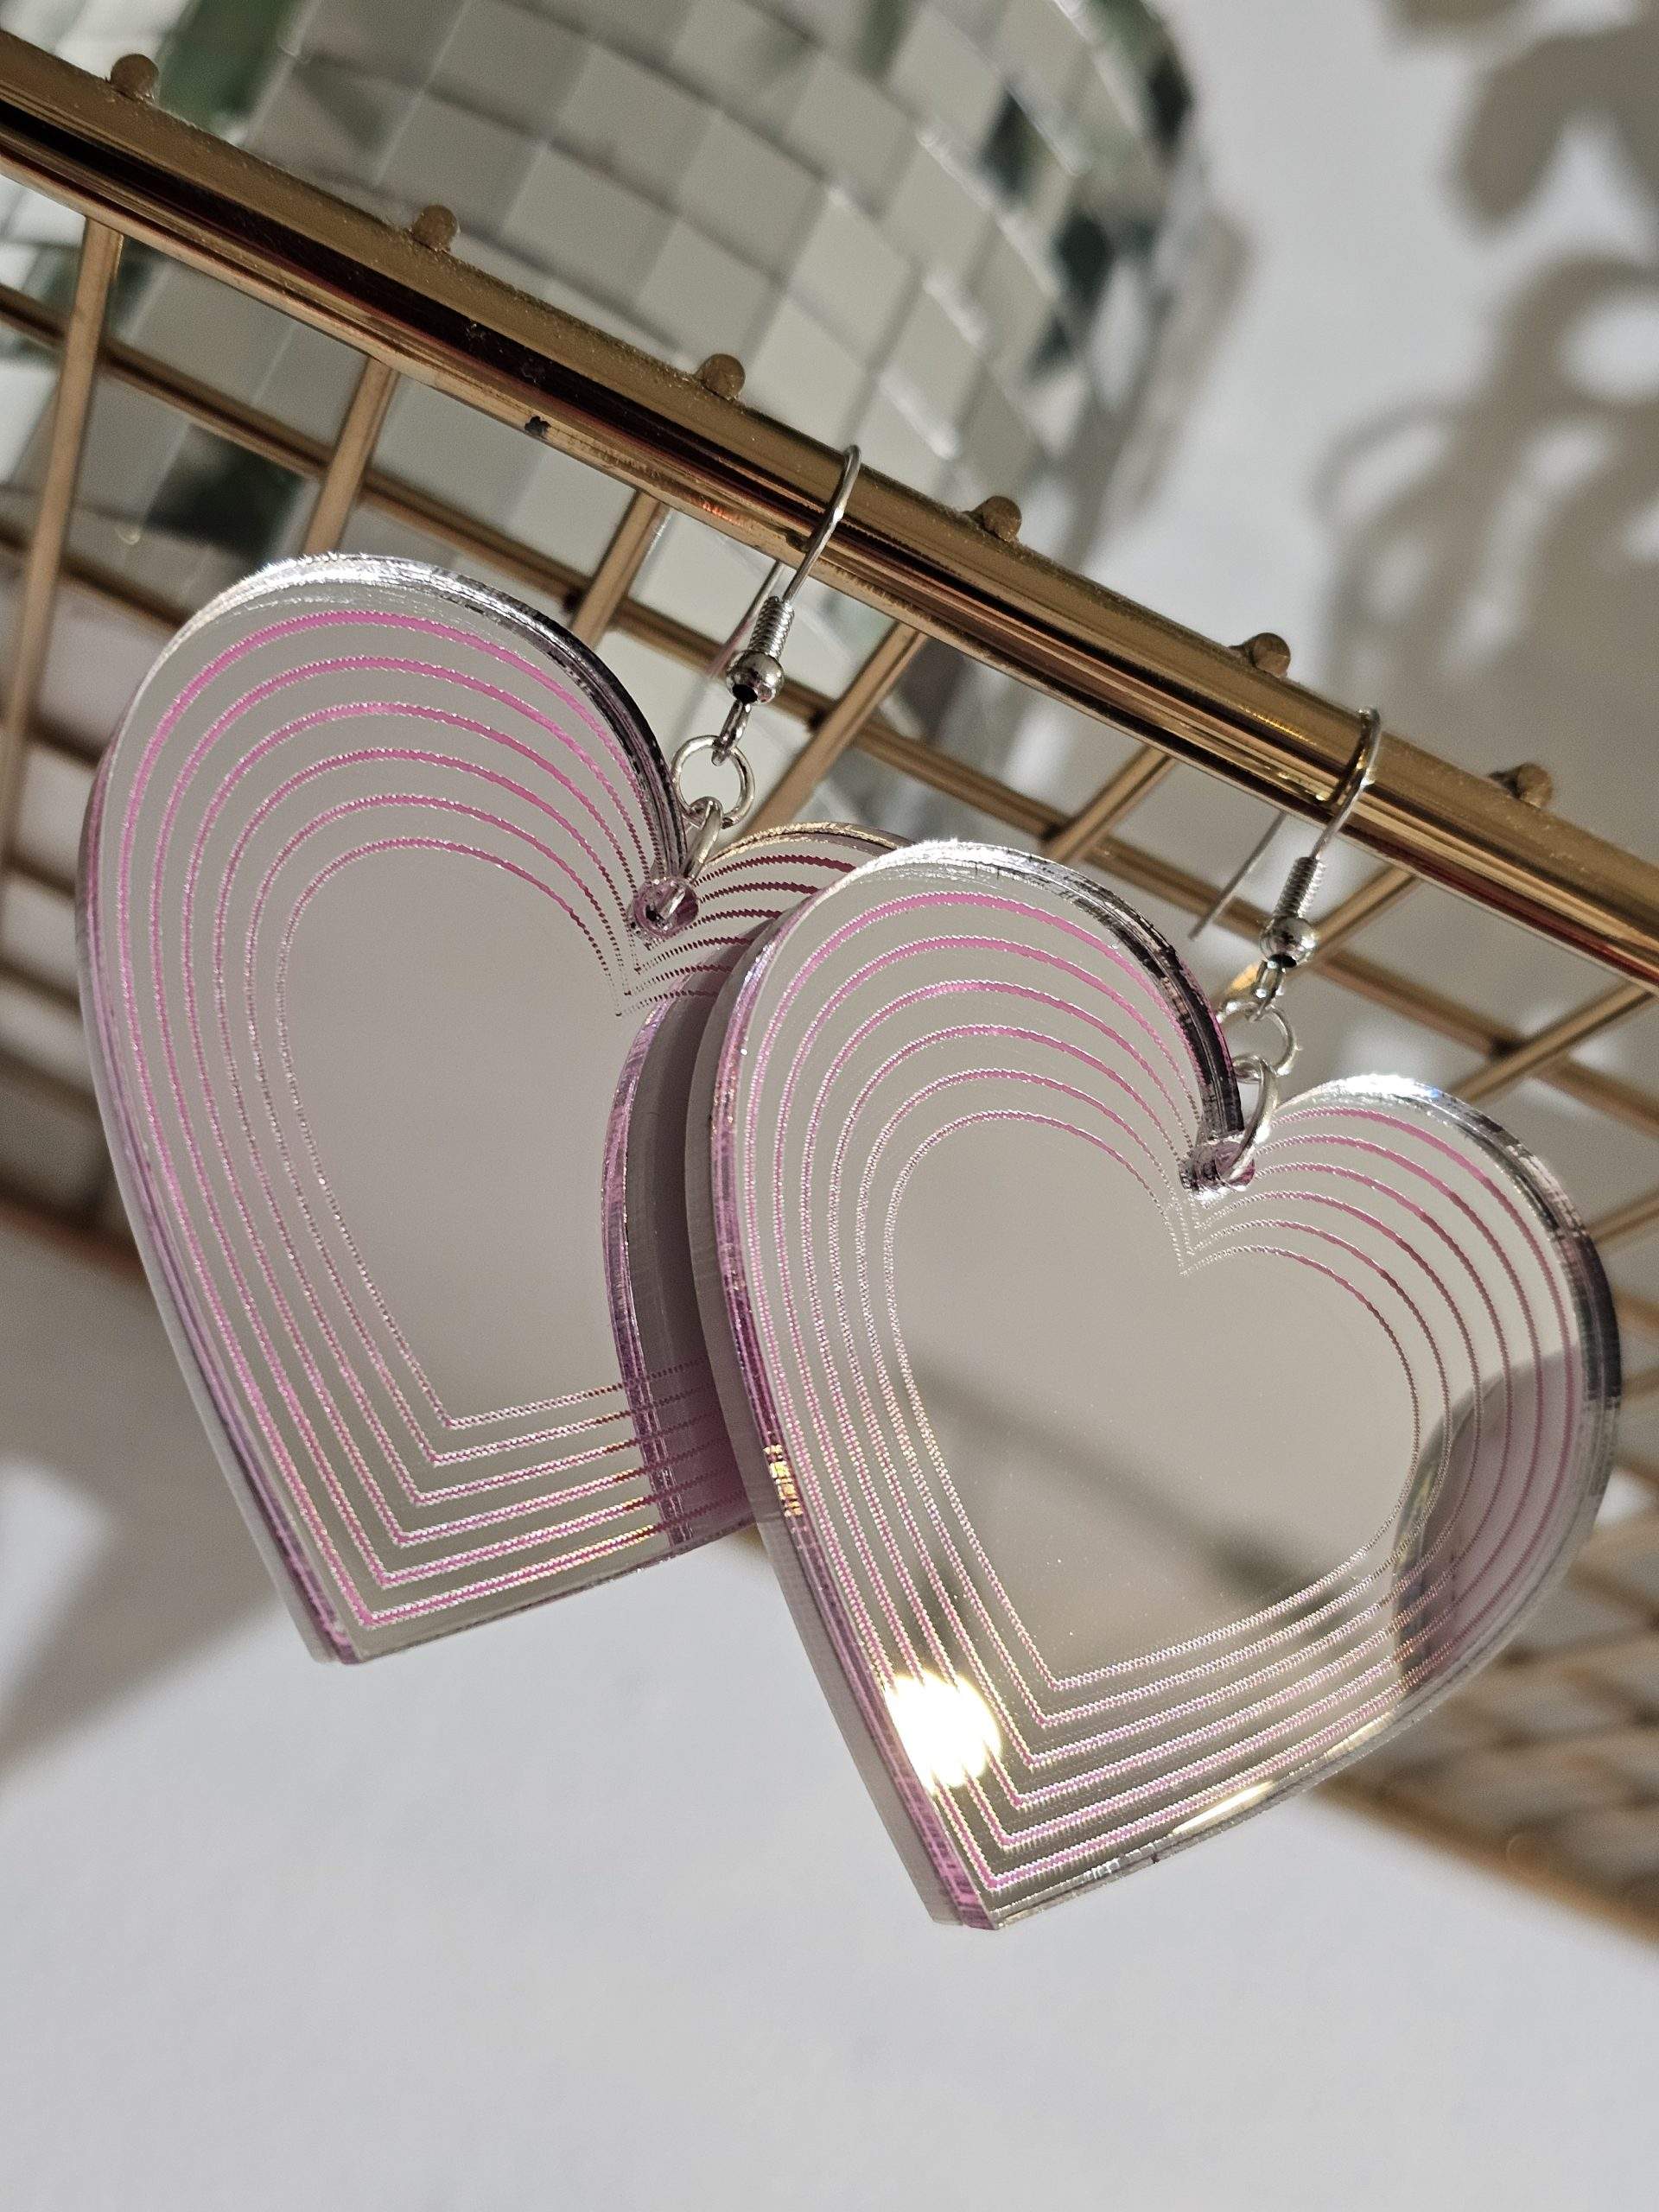 Heart shapped earrings made with silver mirror and candy pink details.